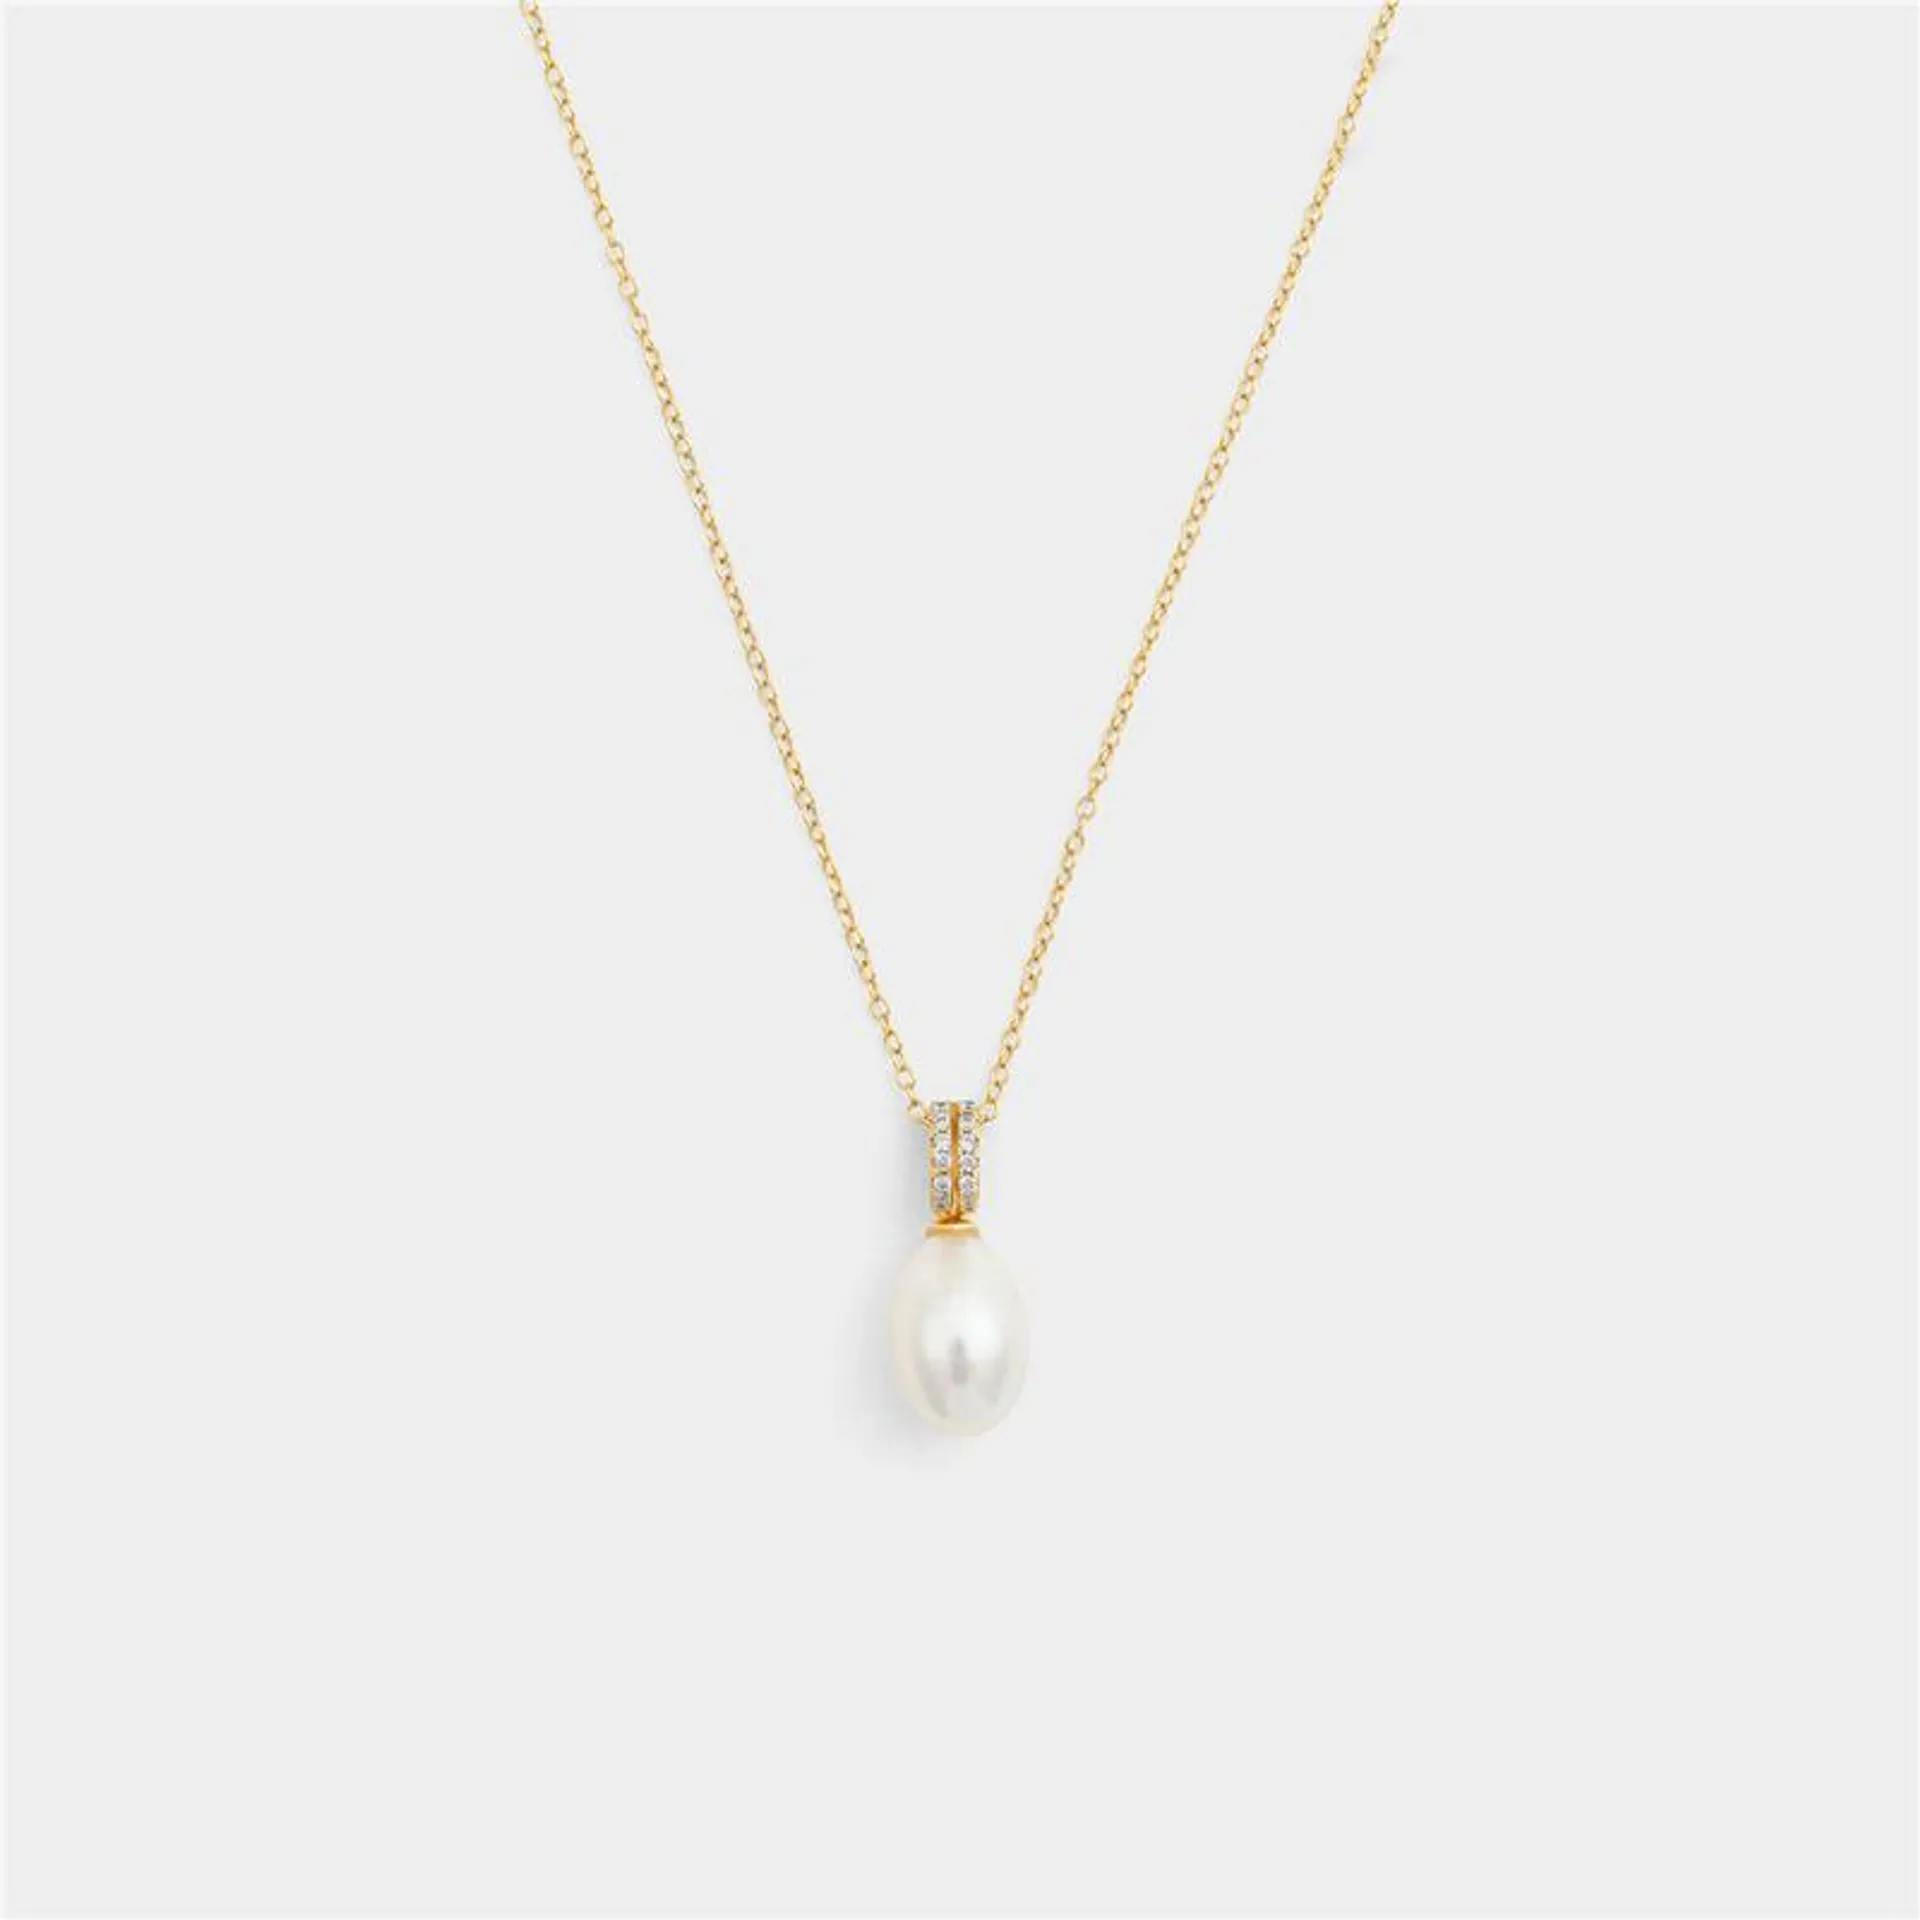 Gold Plated Sterling Silver Freshwater Pearl Pendant